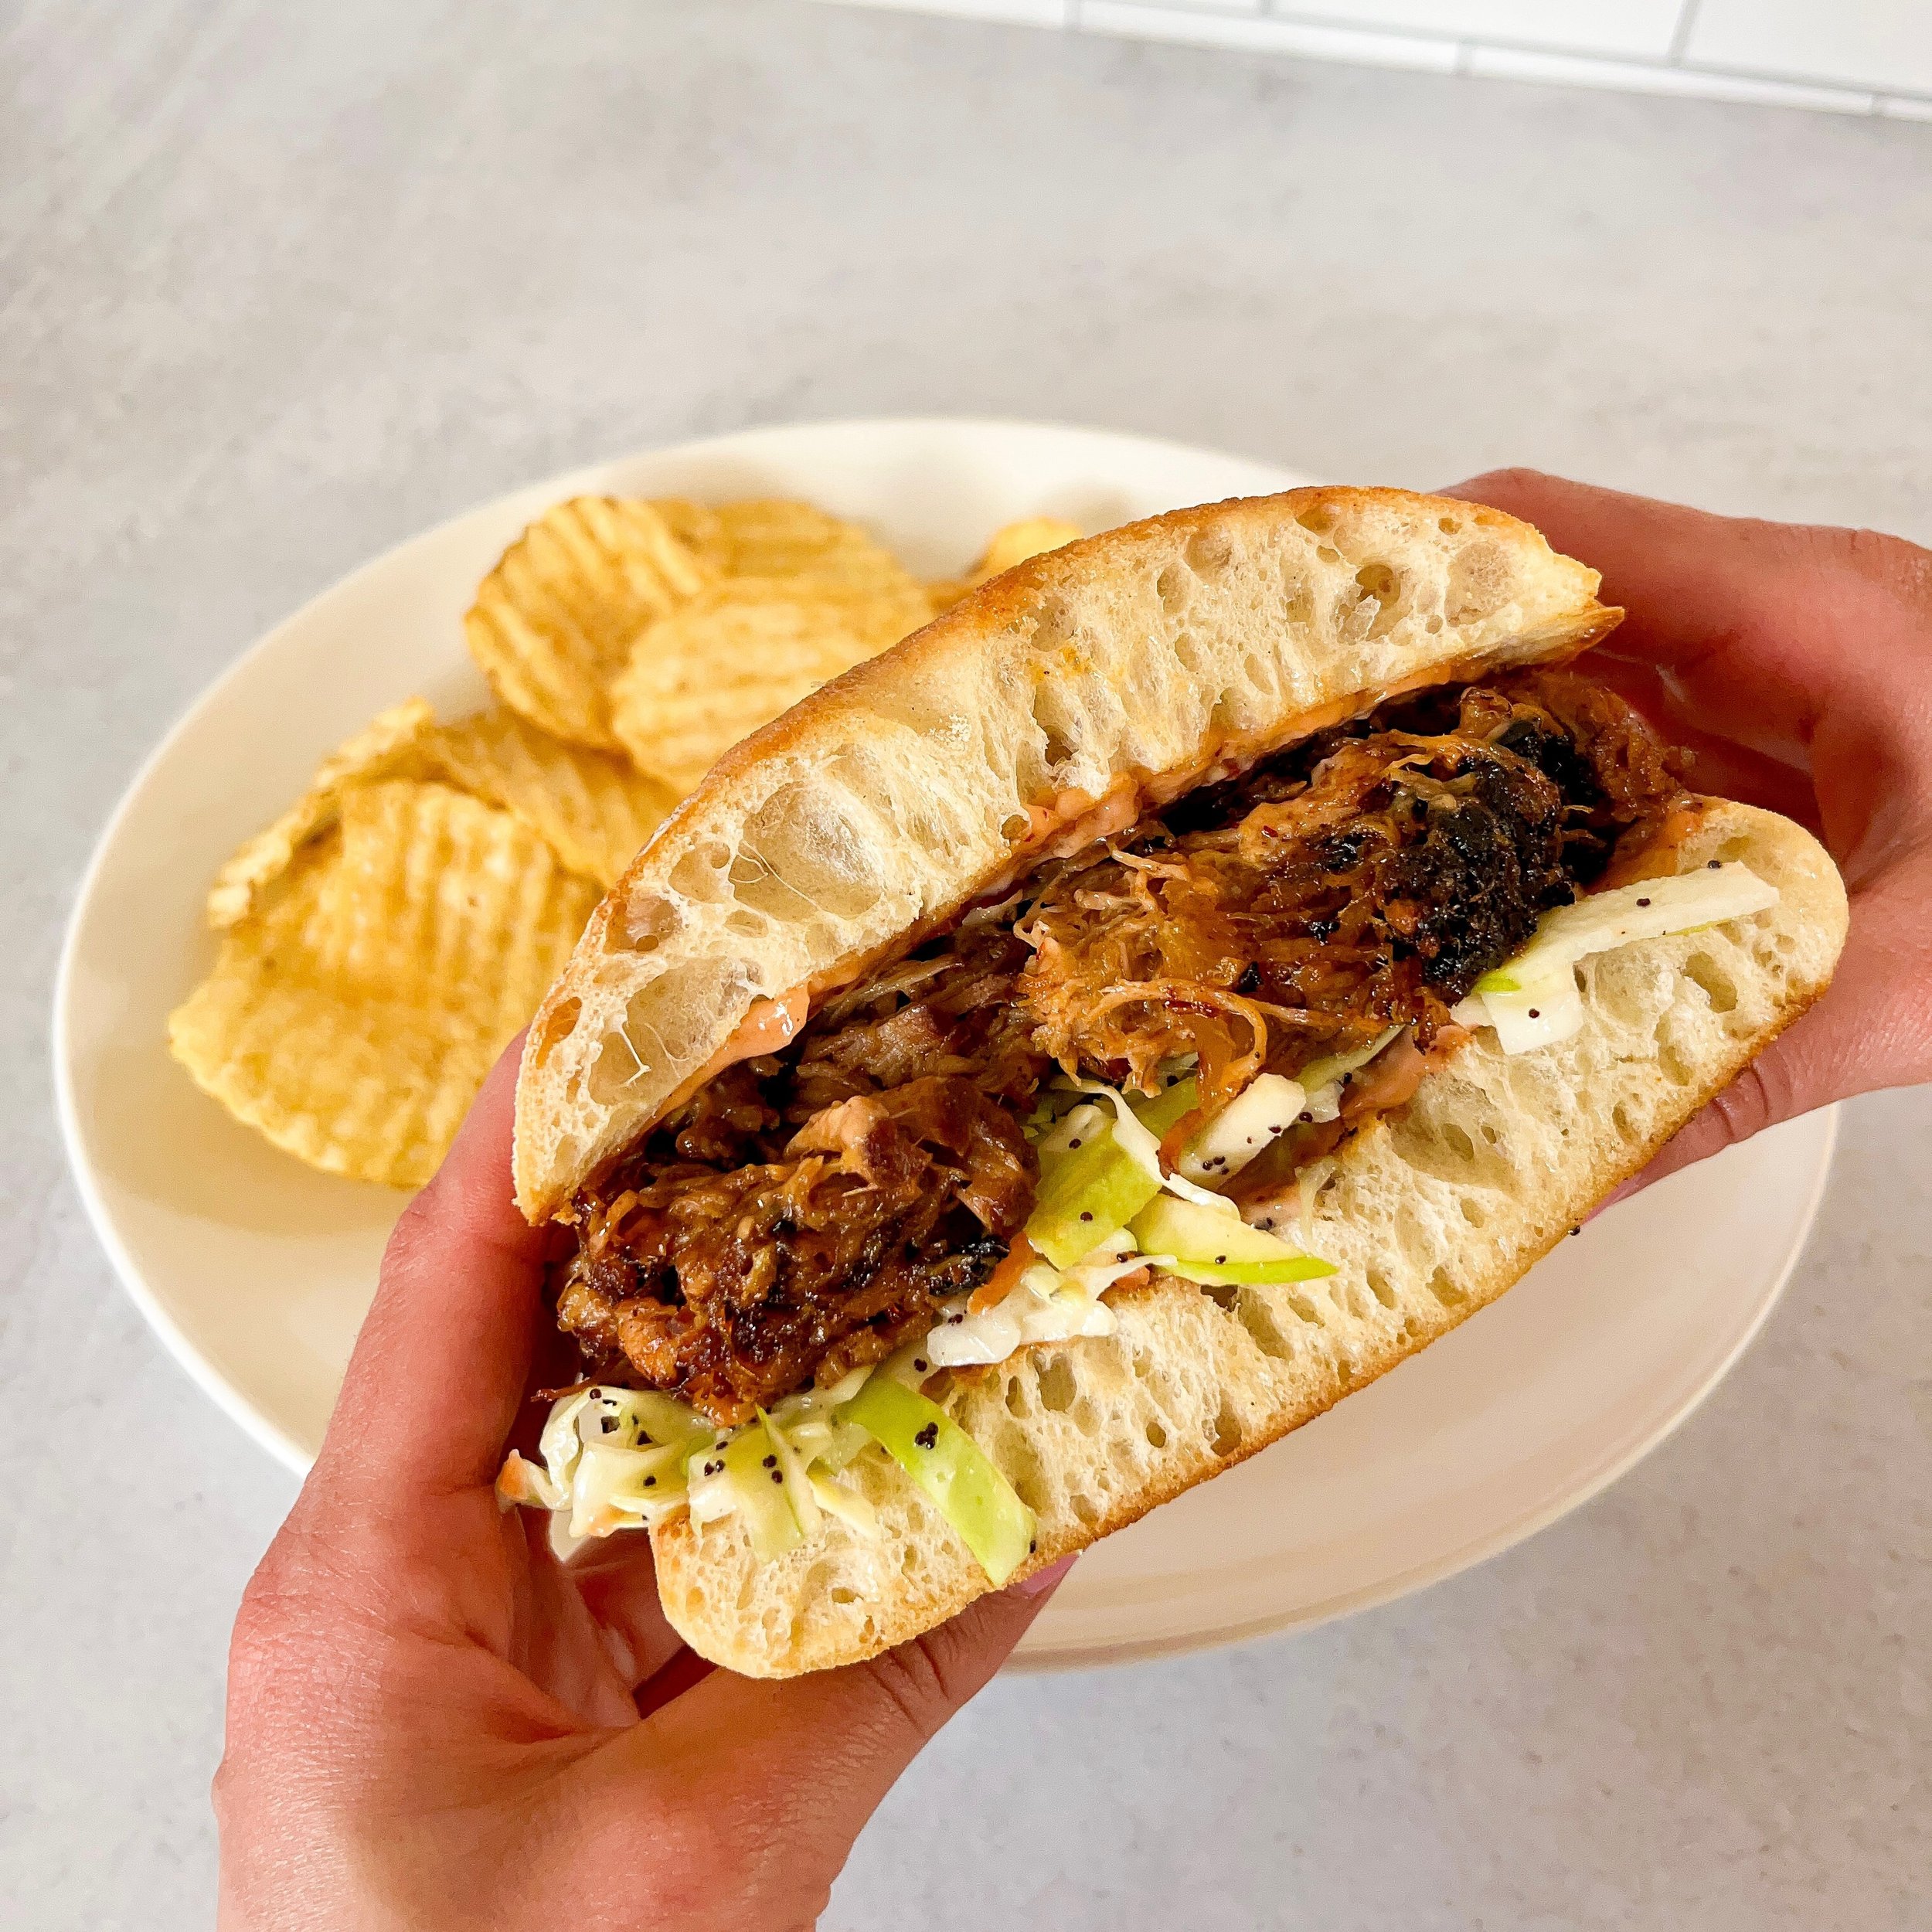 Mouth watering Pulled Pork Sandwich at California Ave location this week!! 🍖 slow roasted tender pork smothered in cranberry honey chipotle bbq sauce and topped with a fresh apple poppyseed slaw served on toasted ciabatta bread. #pulledpork #sandwic